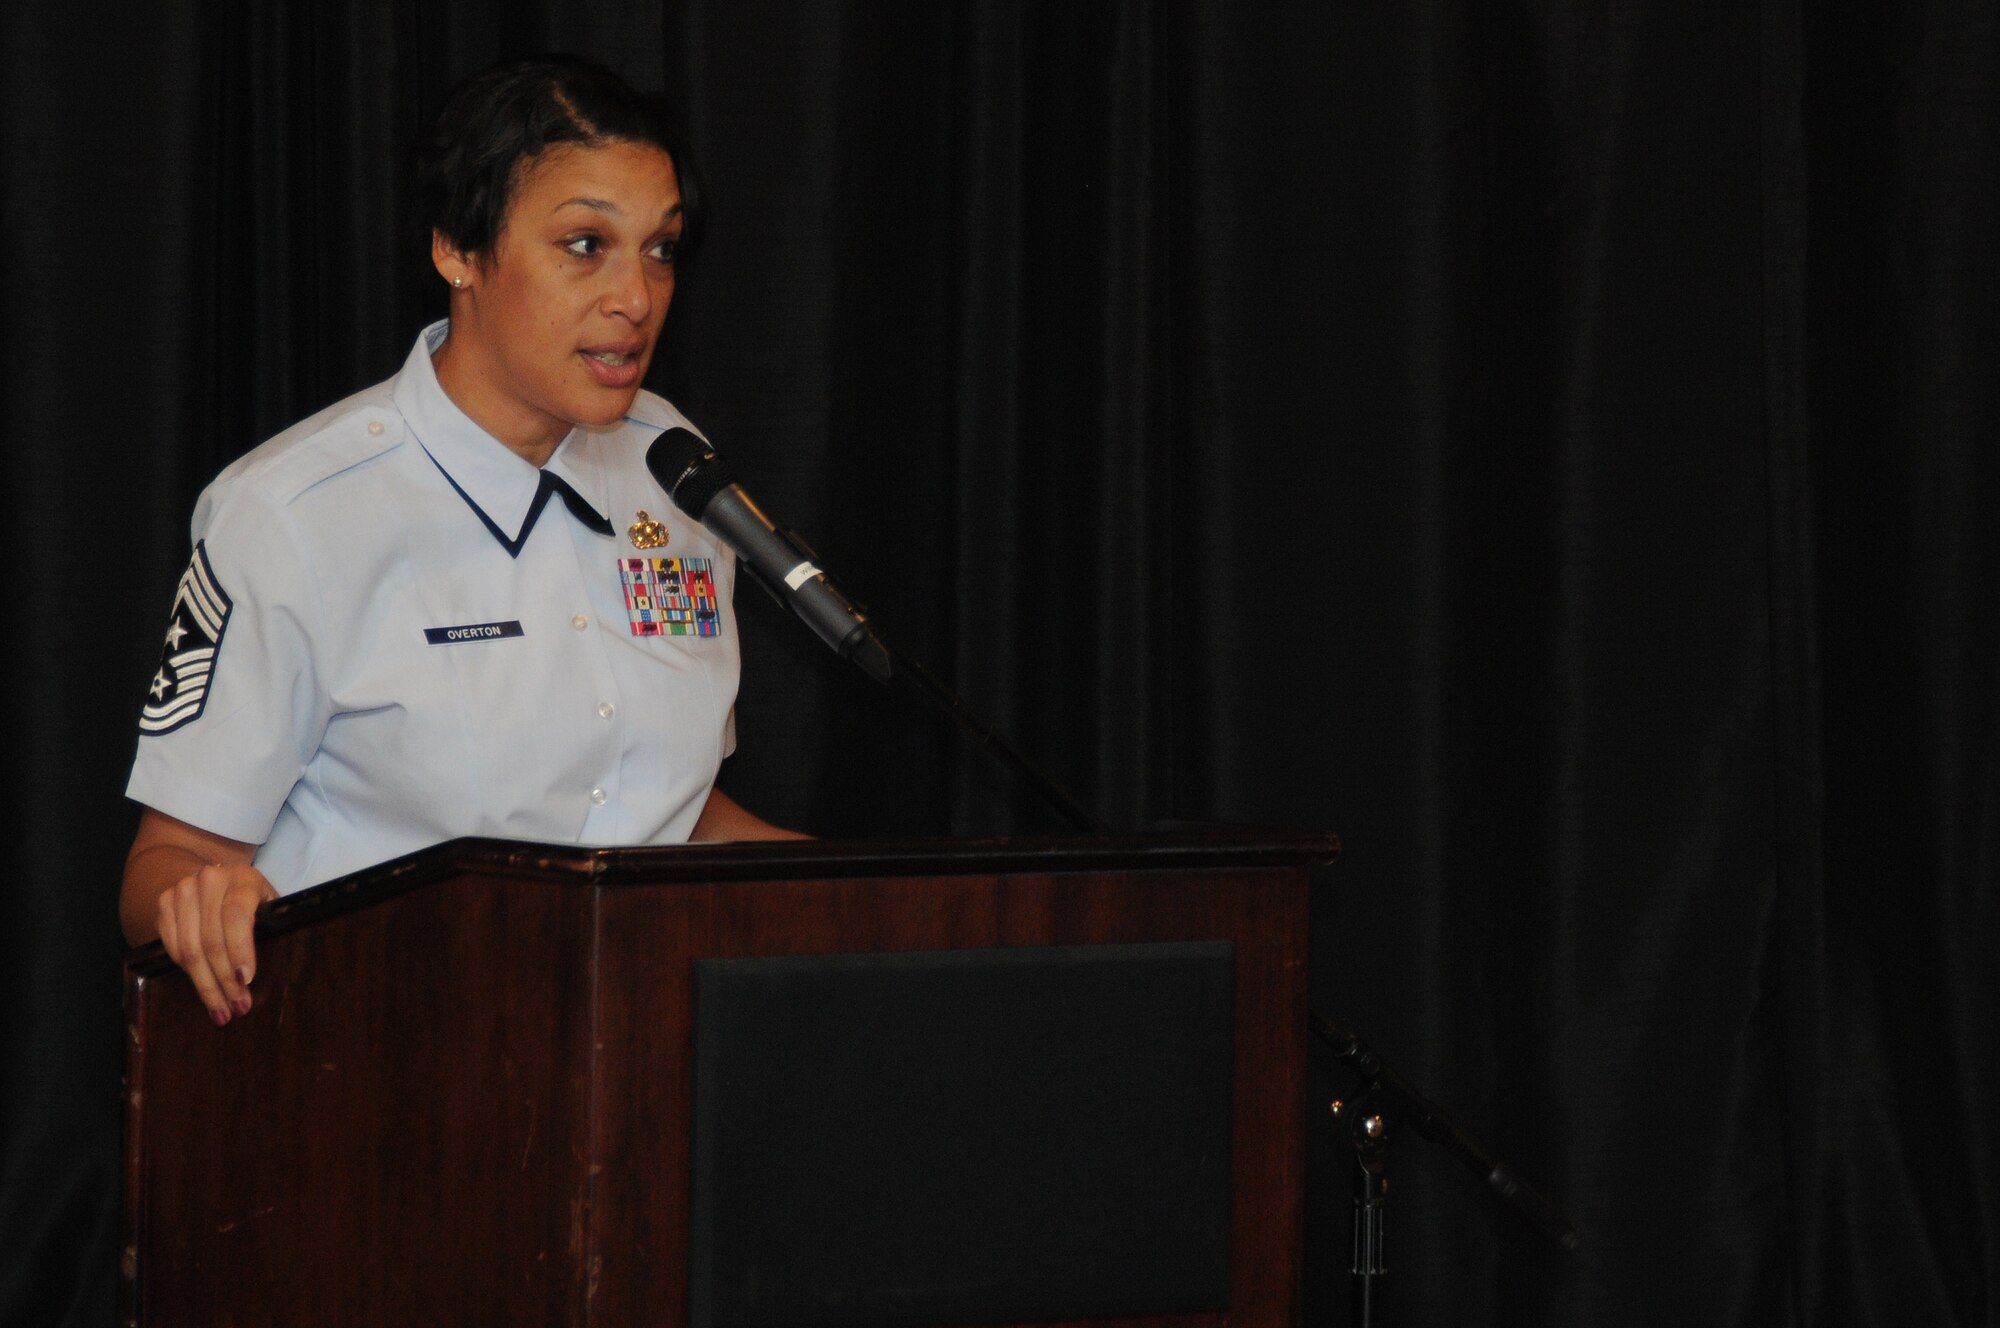 ANDERSEN AIR FORCE BASE, Guam - Chief Master Sergeant Margarita Overton, 36th Wing command chief speaks during the Women?s History Month luncheon at Top of The Rock, April 5. Chief Overton touched basis on her keeping it REAL policy, diversity of women within the military and her own experiences becoming a command chief.(U.S. Air Force photo/Senior Airman Carlin Leslie)